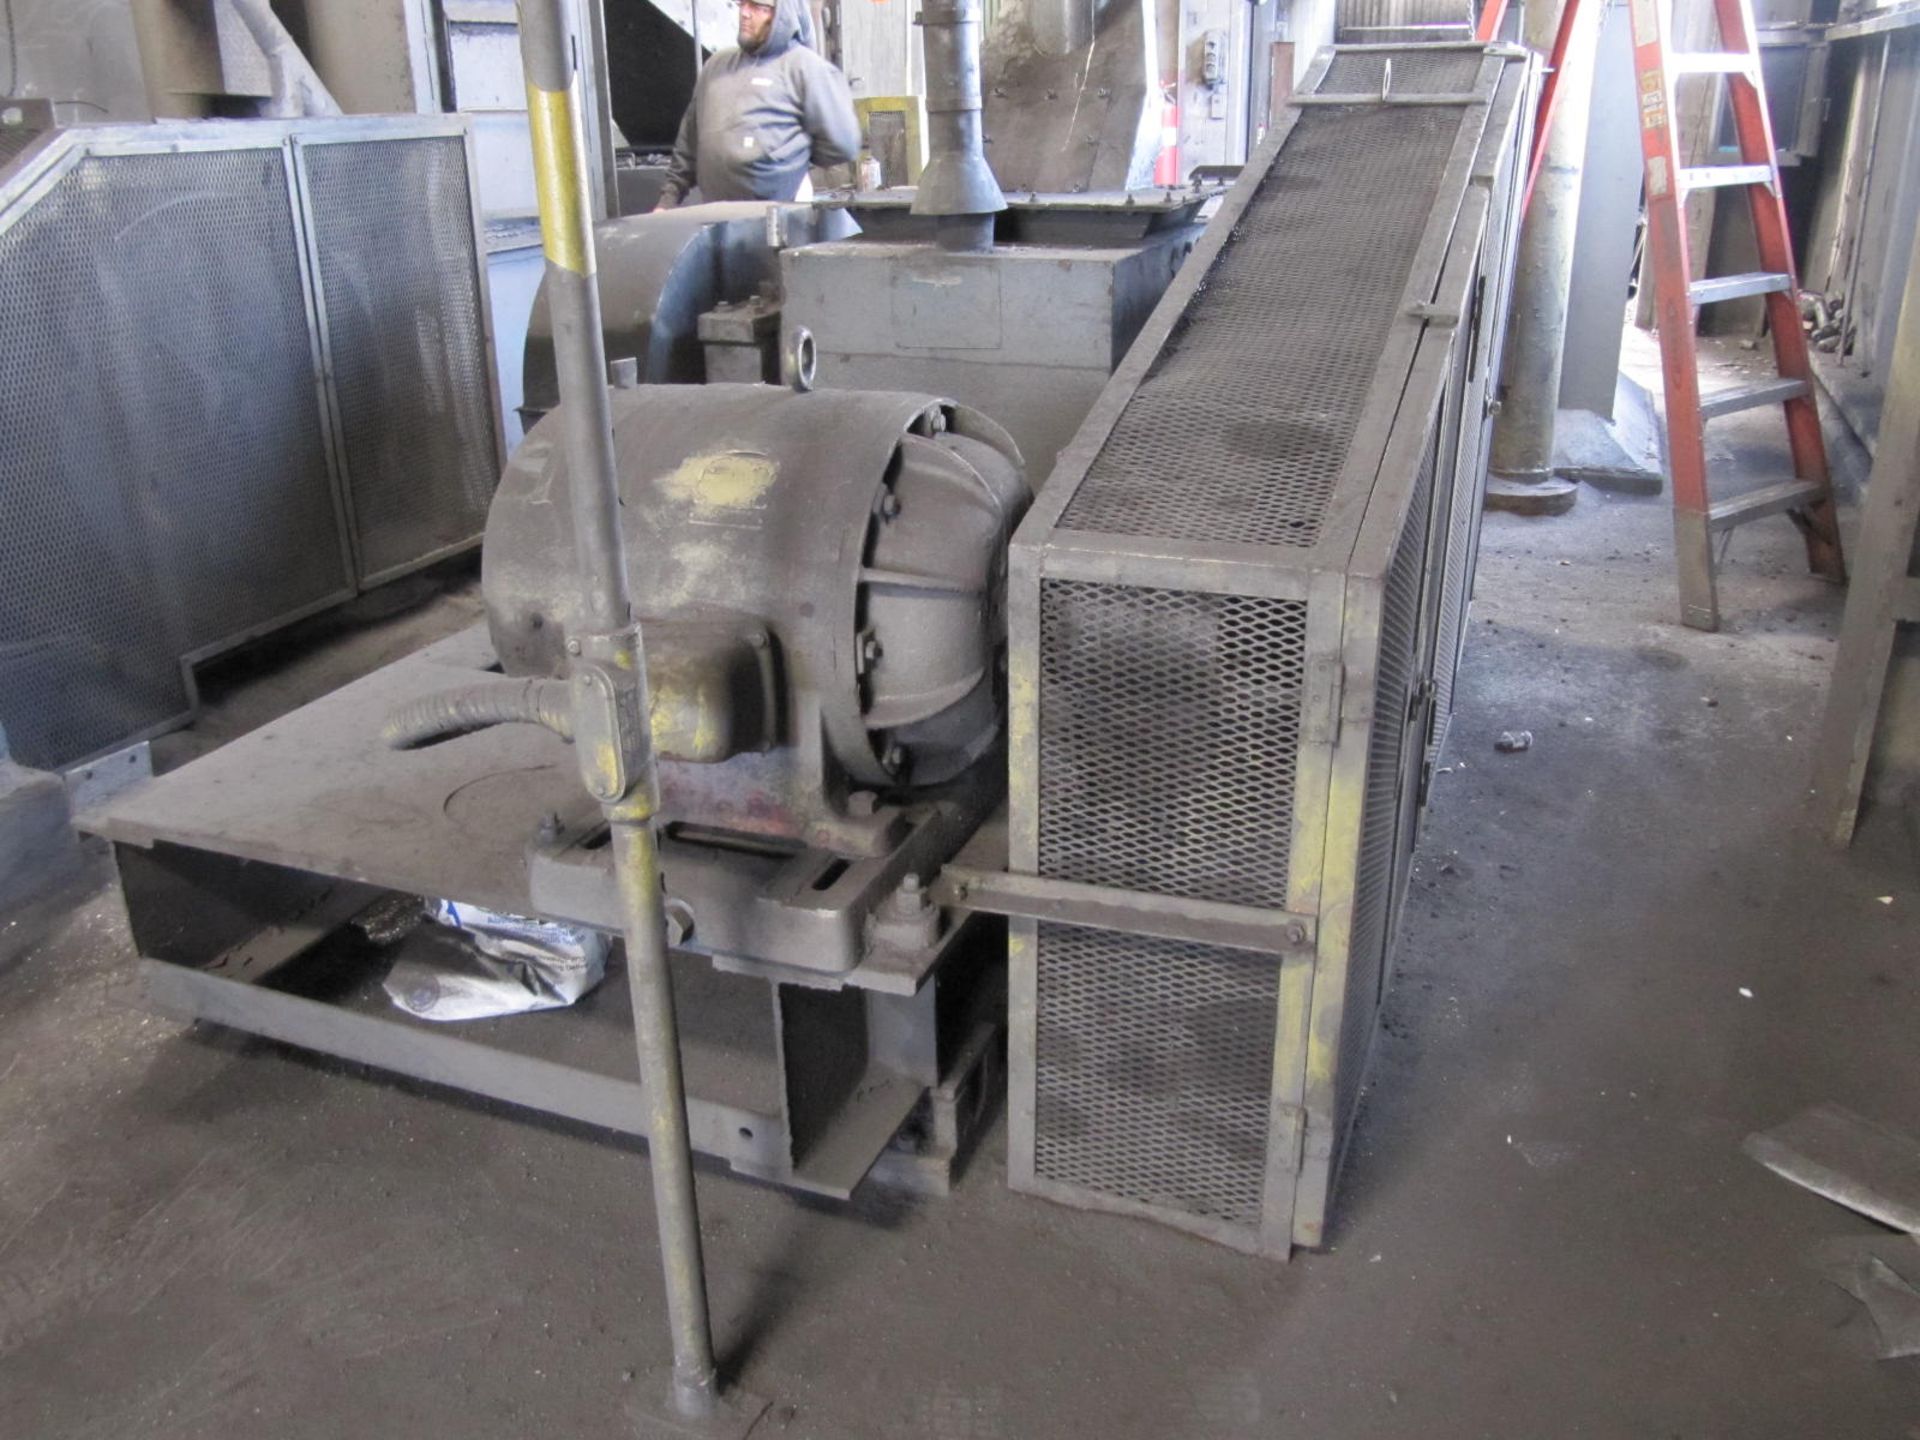 Jeffrey roll crusher #3, 30" x 26" dia double rolls, with (1) 20 HP motor (located on 6th floor of